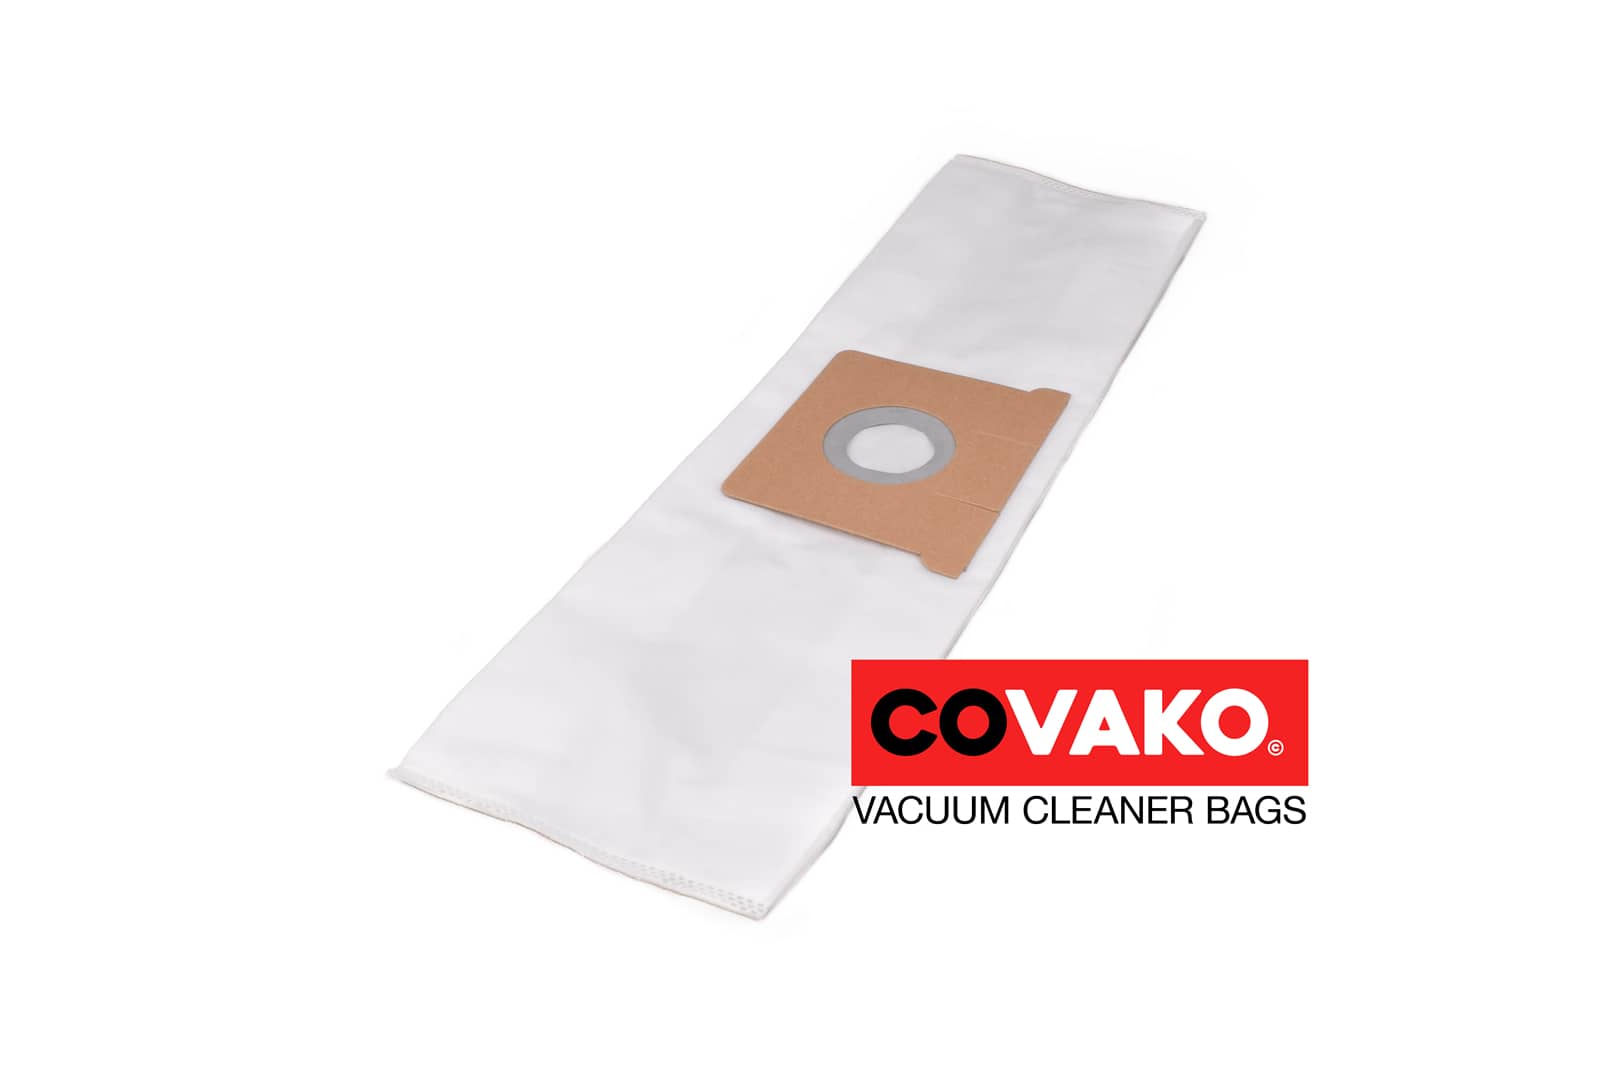 Tennant V 5 Compact / Synthesis - Tennant vacuum cleaner bags